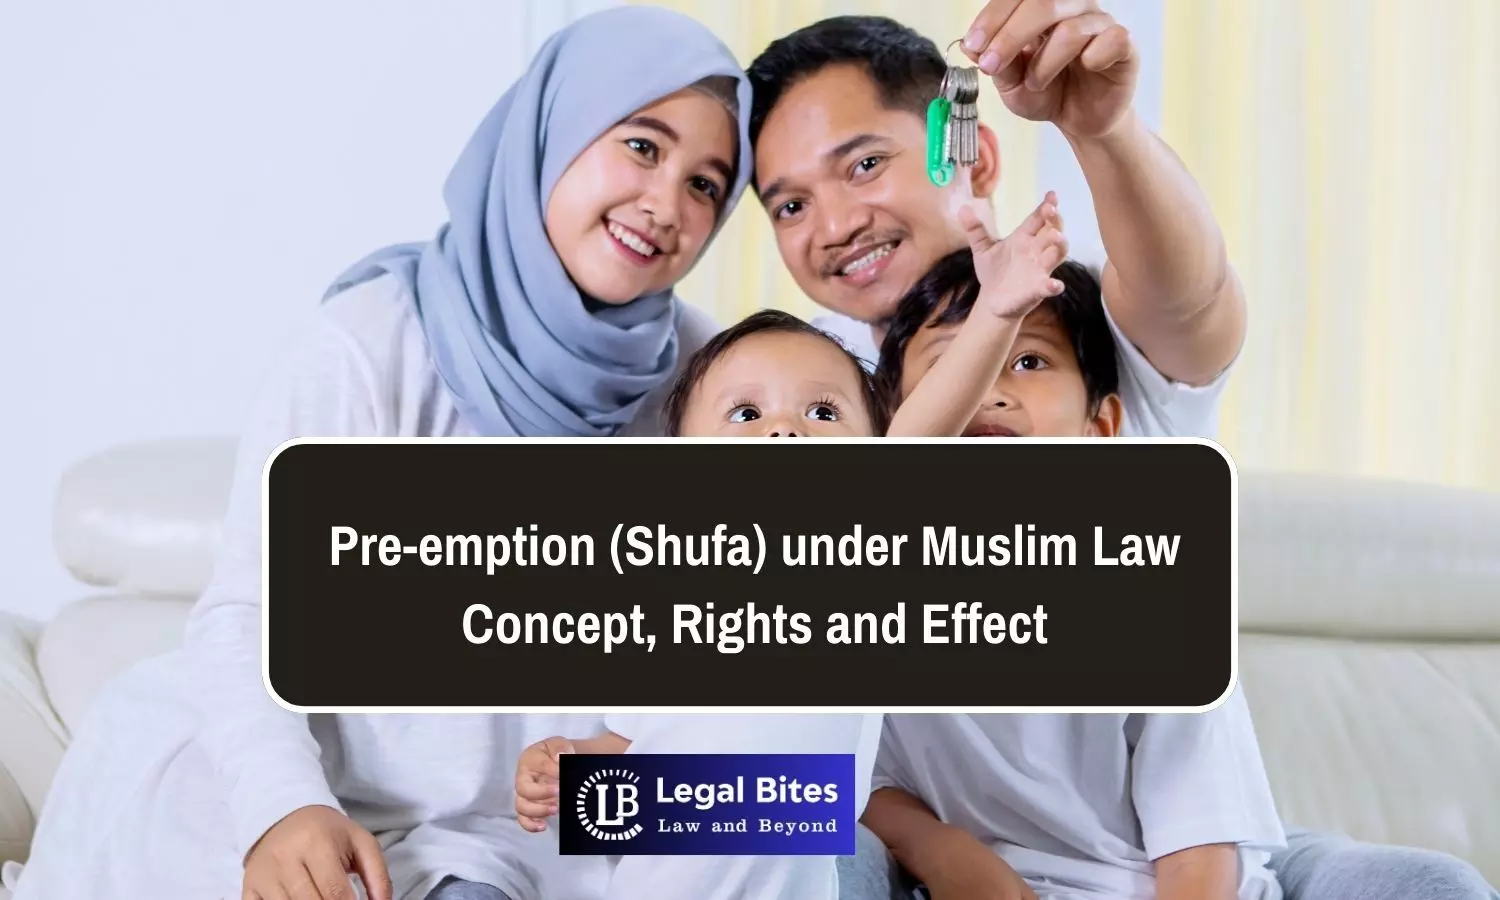 Pre-emption (Shufa) under Muslim Law - Concept, Rights and Effect